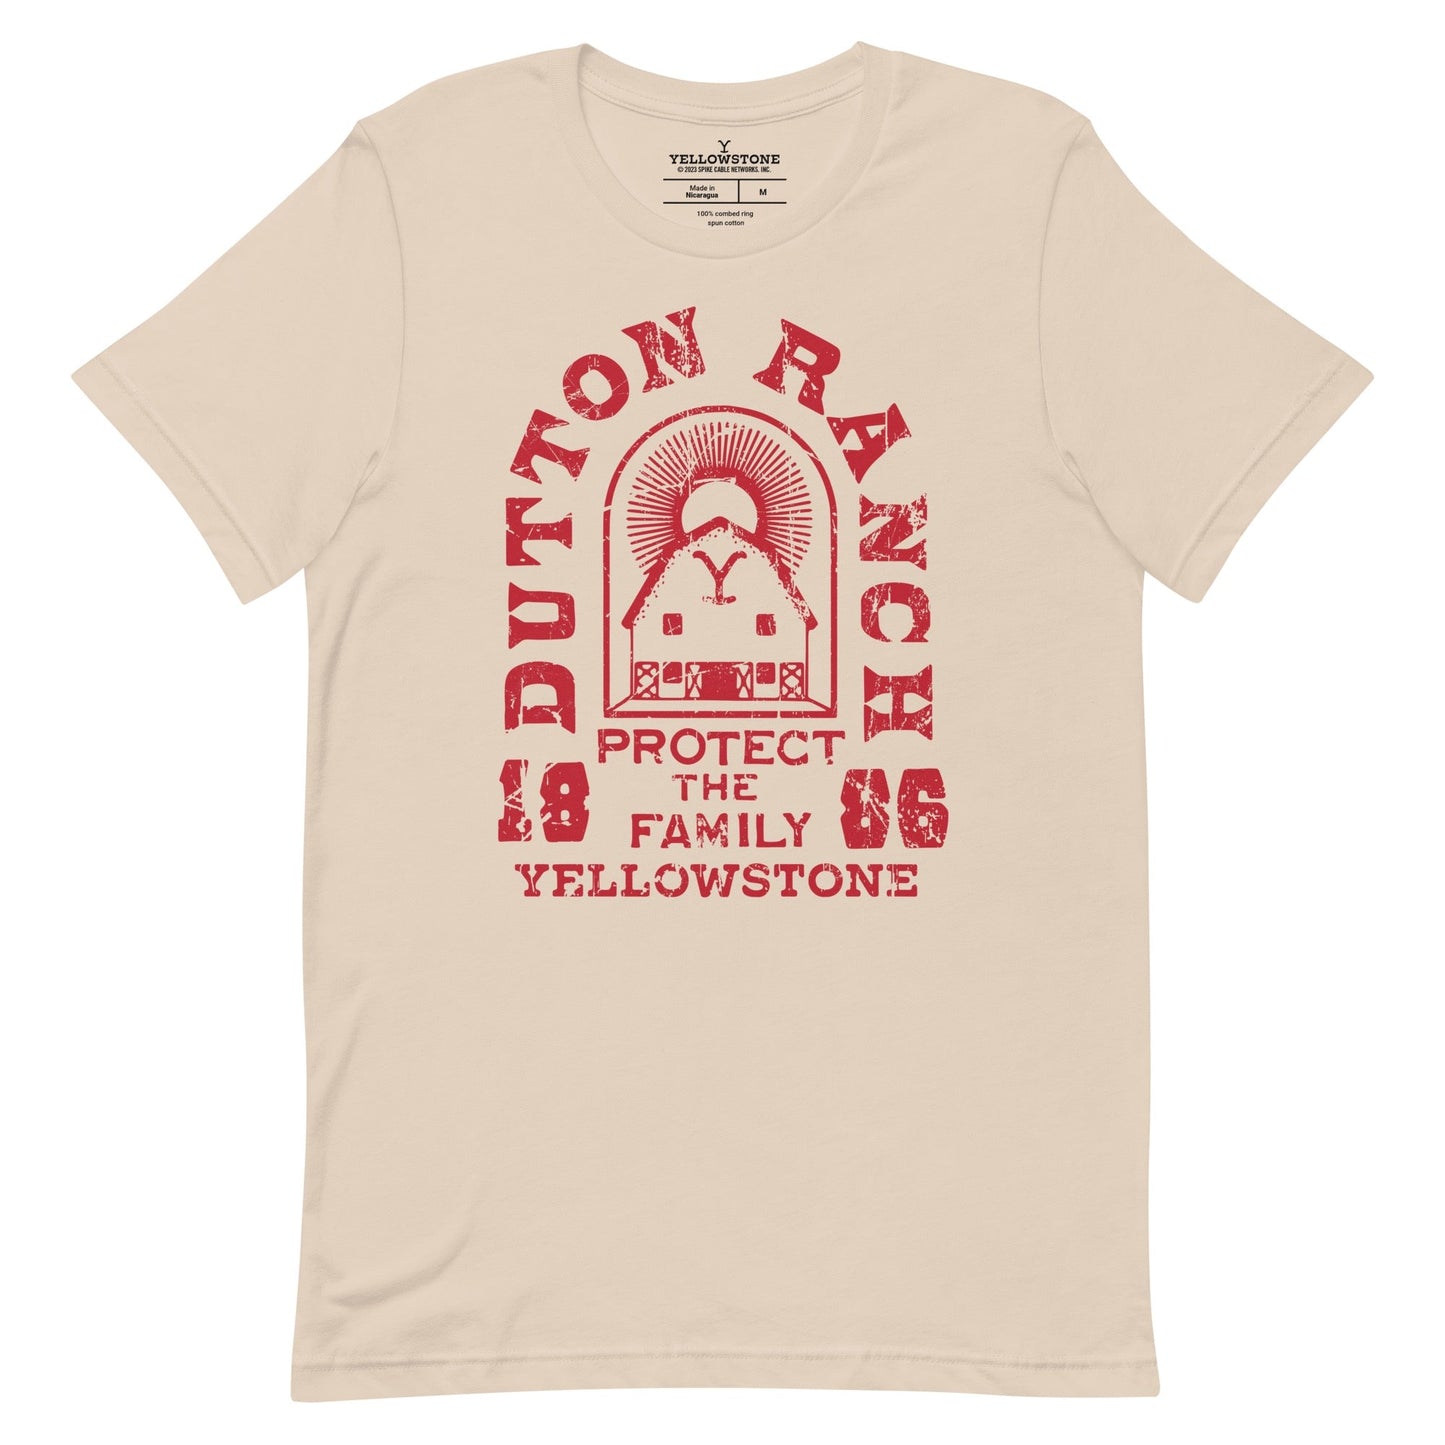 Yellowstone Protect The Family T - Shirt - Paramount Shop